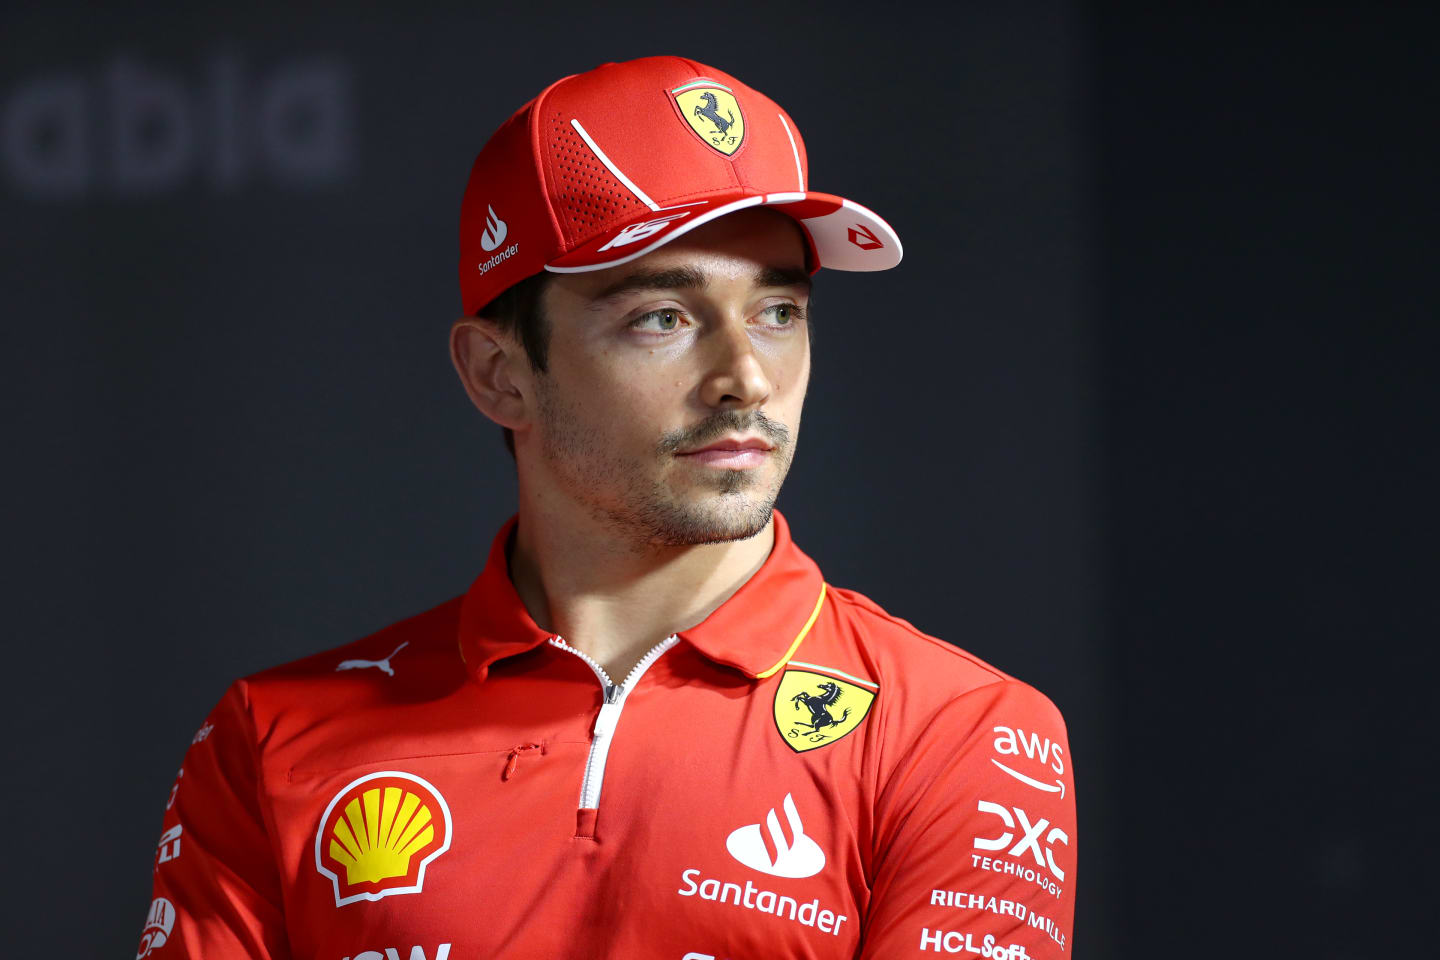 JEDDAH, SAUDI ARABIA - MARCH 06: Charles Leclerc of Monaco and Ferrari attends the Drivers Press Conference during previews ahead of the F1 Grand Prix of Saudi Arabia at Jeddah Corniche Circuit on March 06, 2024 in Jeddah, Saudi Arabia. (Photo by Peter Fox/Getty Images)